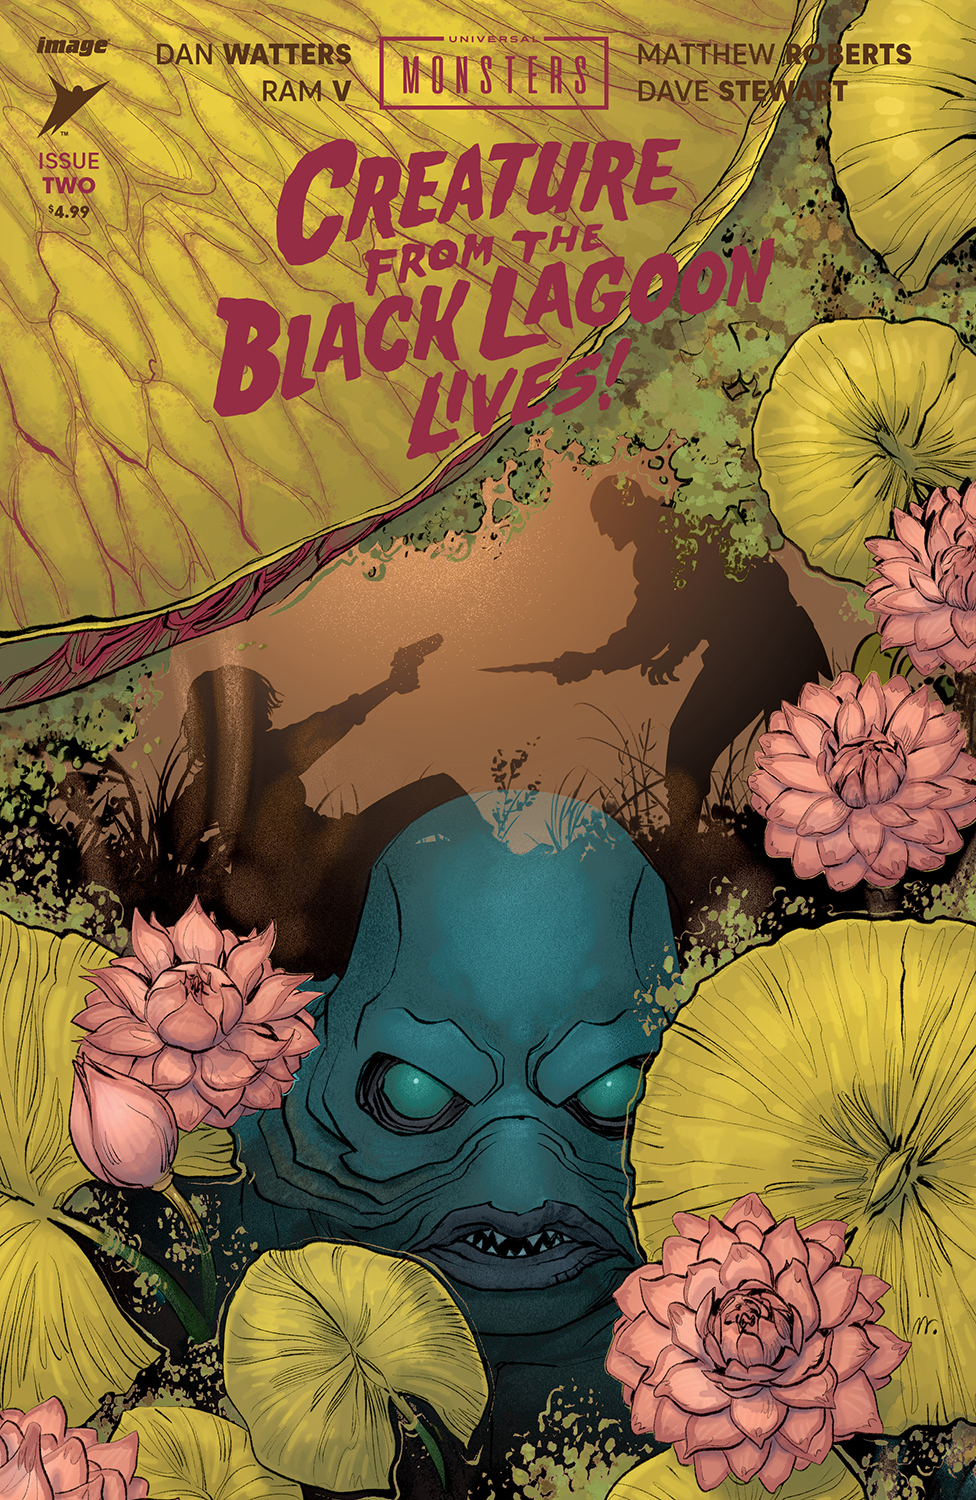 Universal Monsters the Creature from the Black Lagoon Lives #2 Cover A Matthew Roberts & Dave St (Of 4)